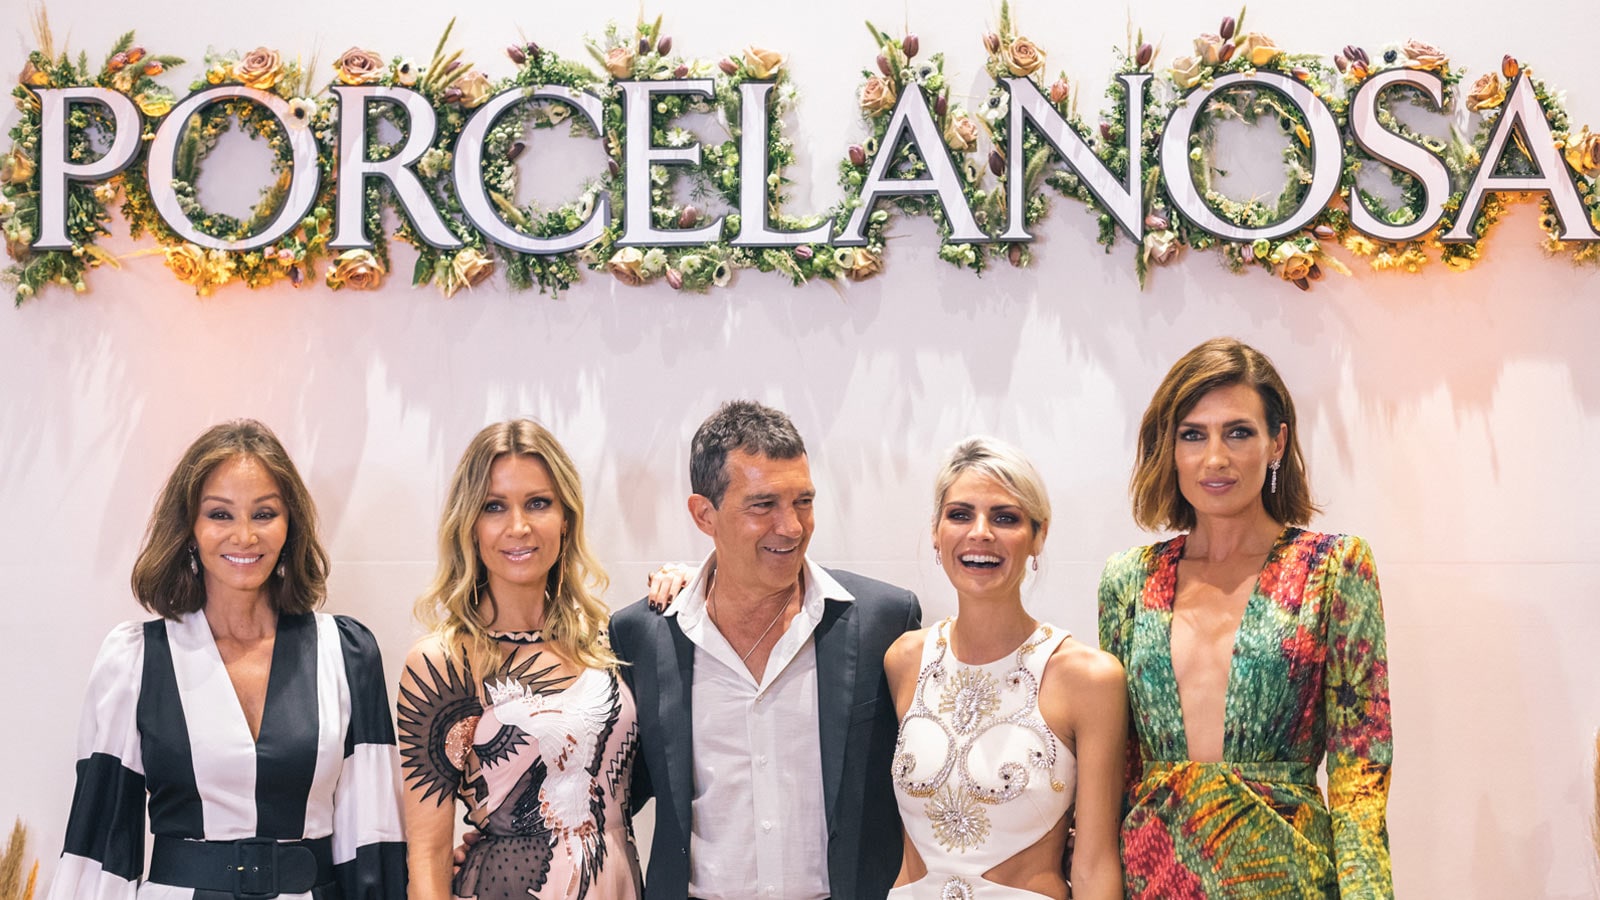 PORCELANOSA Group opens its newly renovated showroom in Miami